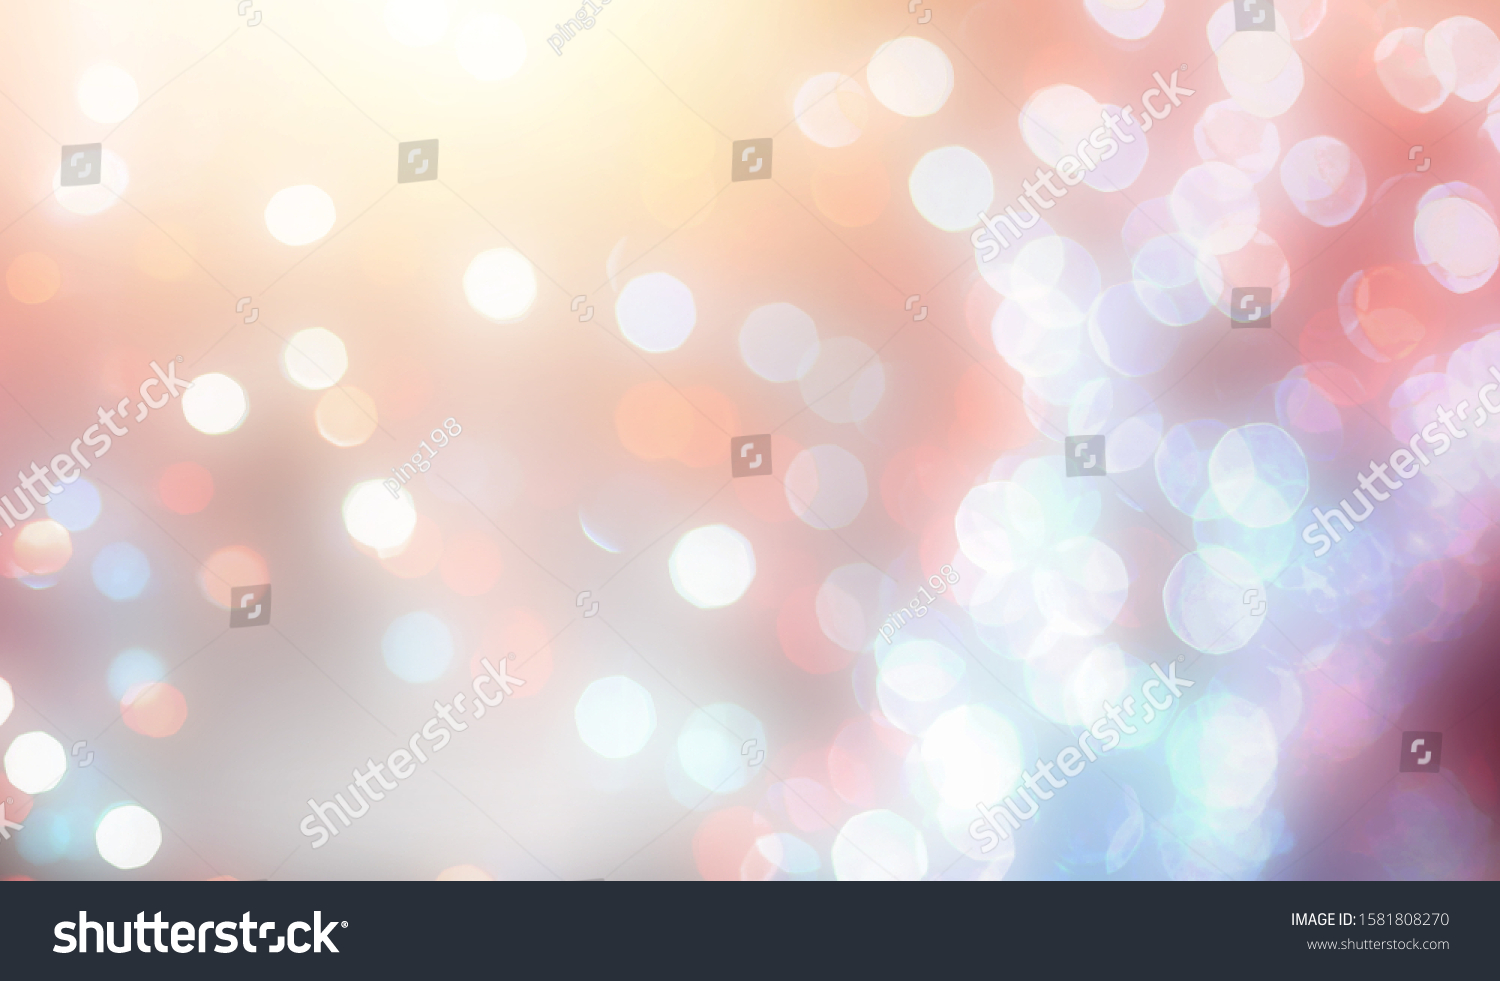 Blurred backdrop, blurred background, circle blur, bokeh blur from the light shining through as a backdrop and beautiful computer screen images. #1581808270